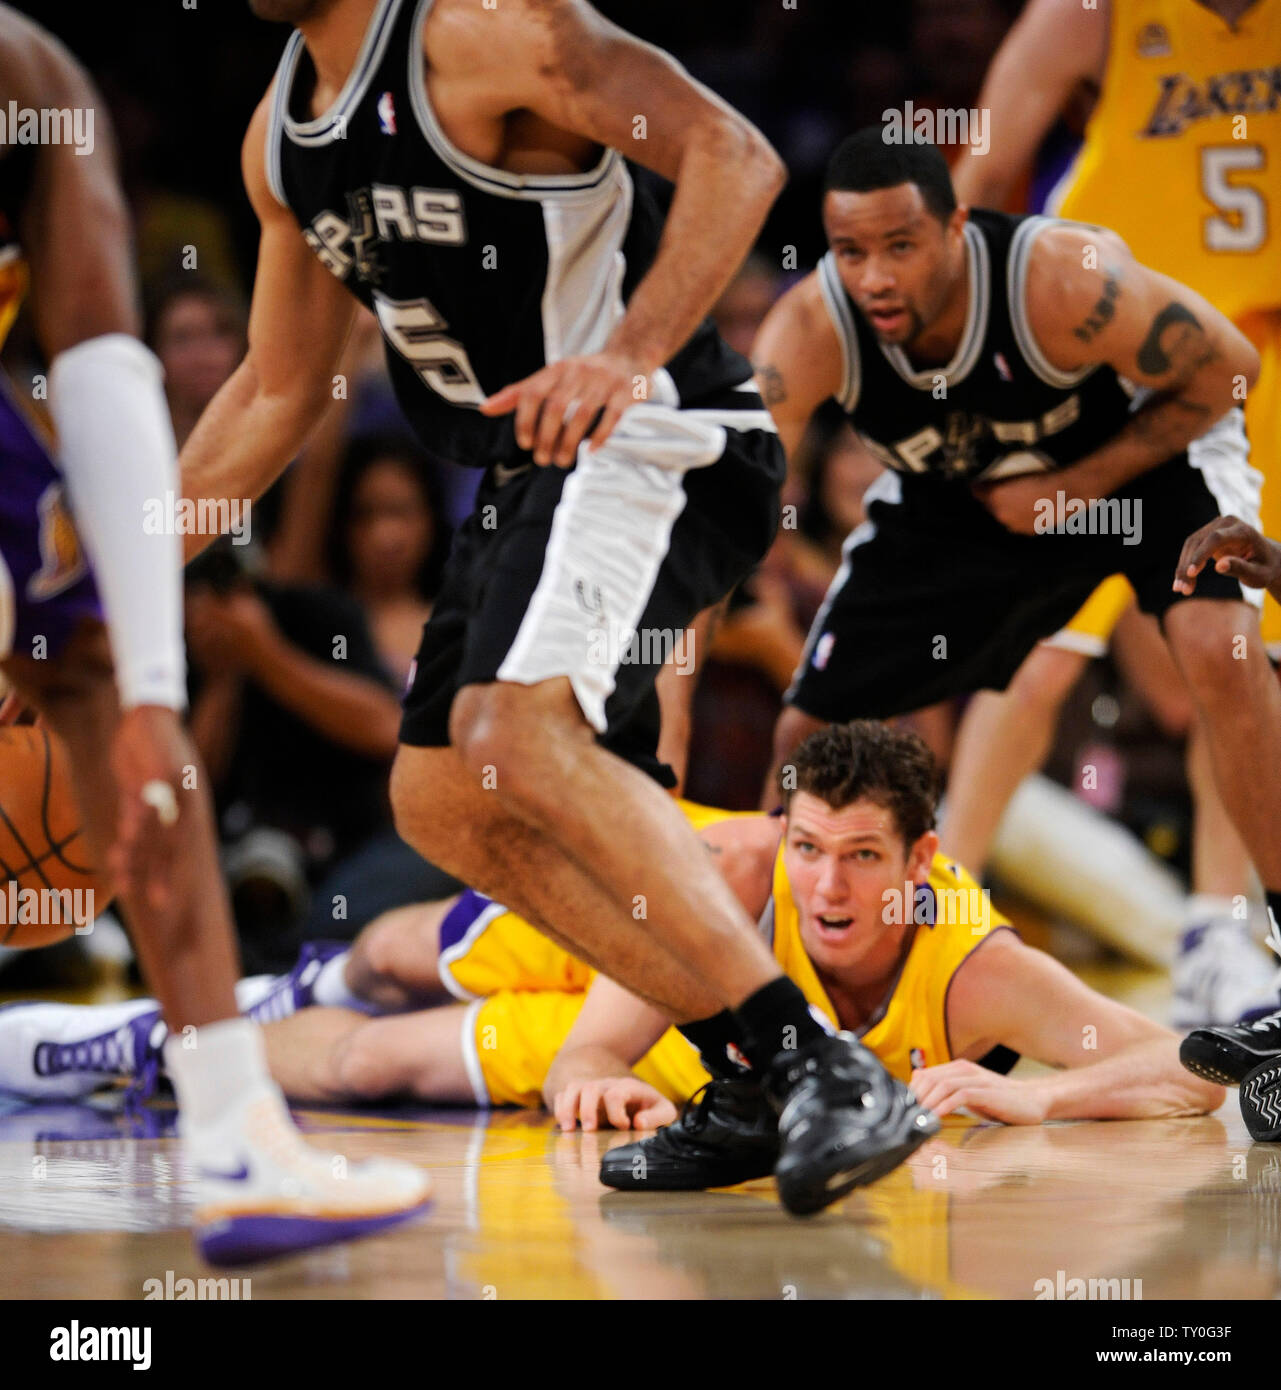 Los Angeles Lakers Luke Walton watches as San Antonio Spurs Ime Udoka recovers a loose ball during the second half of Game 2 of the NBA Western Conference basketball finals in Los Angeles on May 23, 2007. Lakers beat the Spurs 101-71. (UPI Photo/ Phil McCarten) Stock Photo